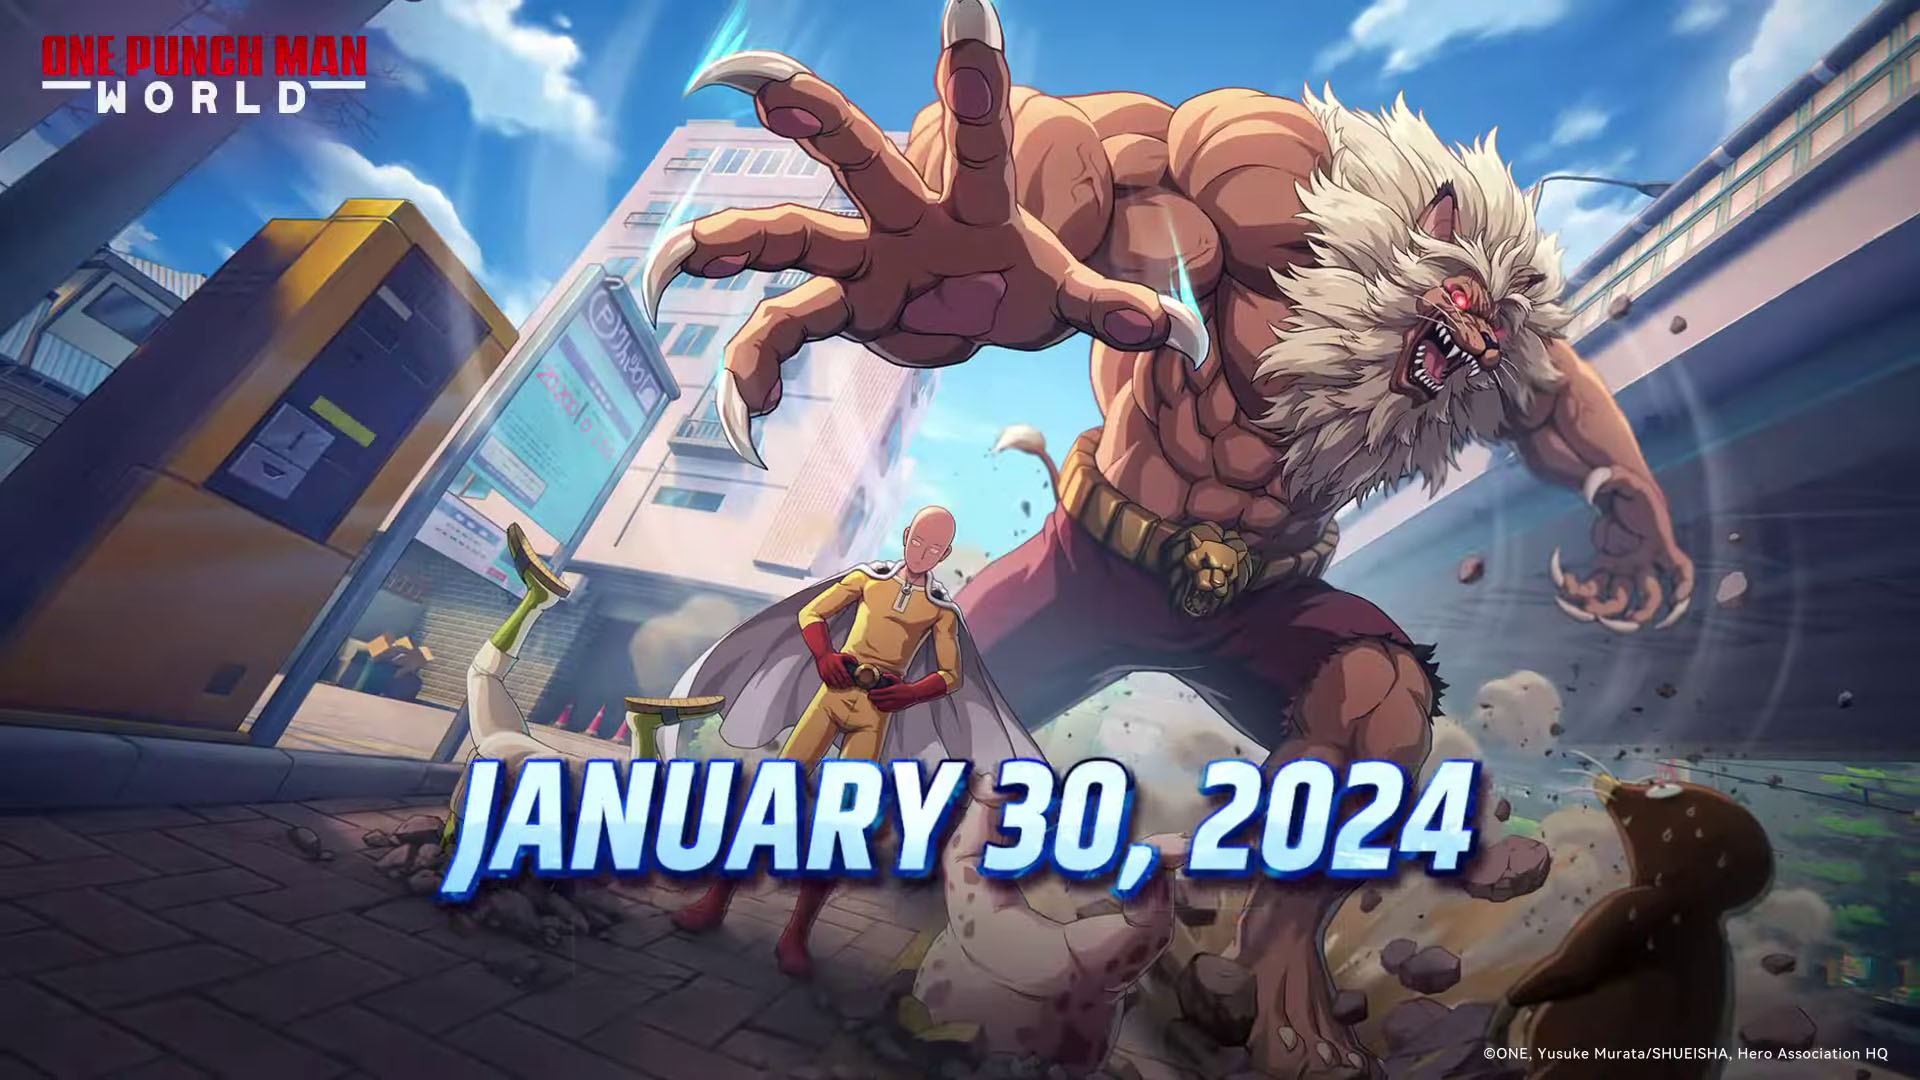 #
      One Punch Man: World launches January 30, 2024